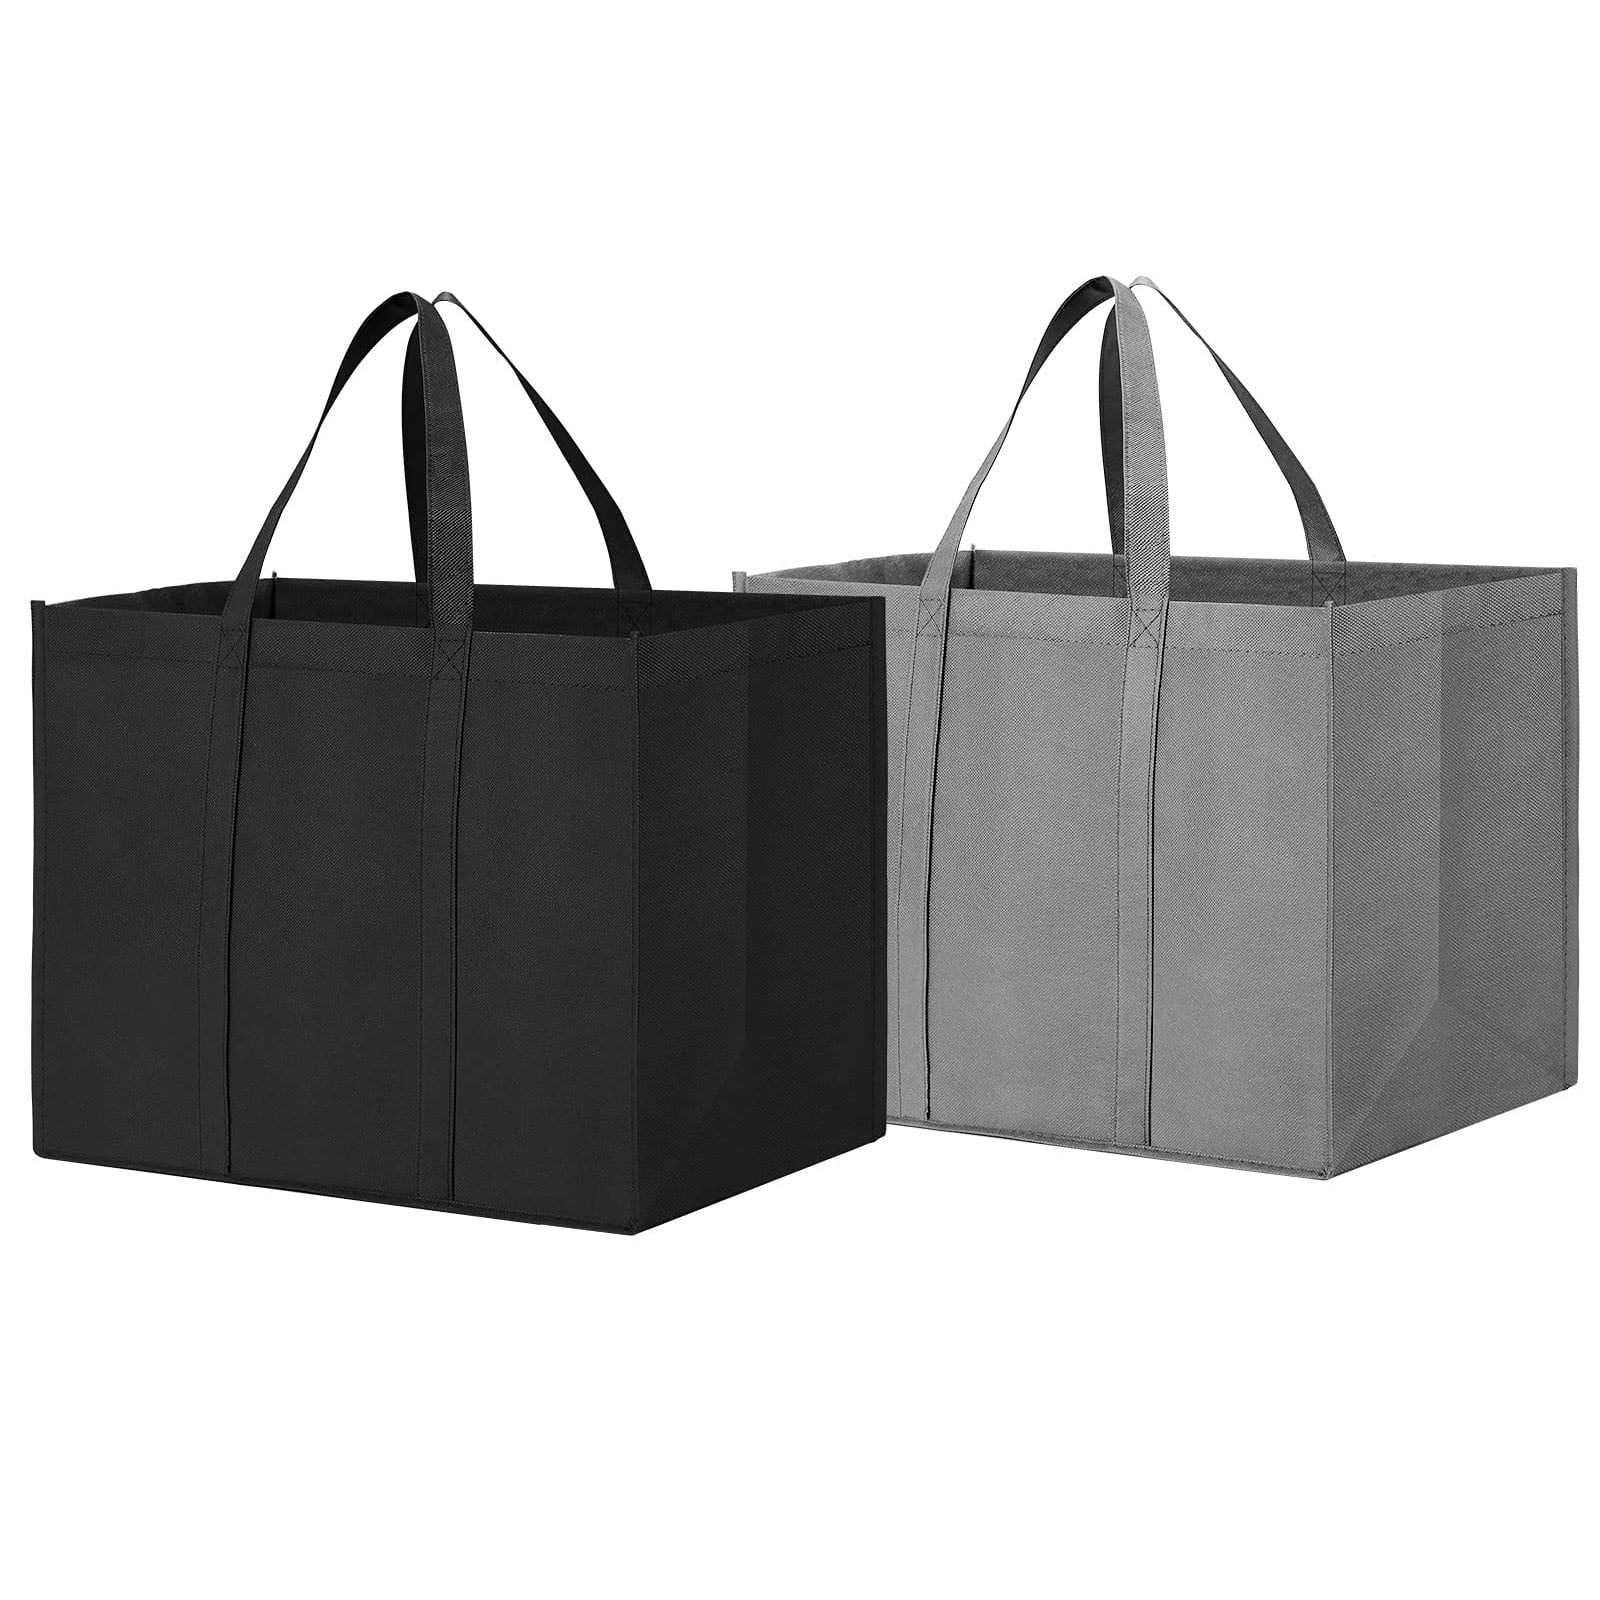 Sherry Reusable Grocery Shopping Bags 2 Pack Large Foldable Tote Bags ...